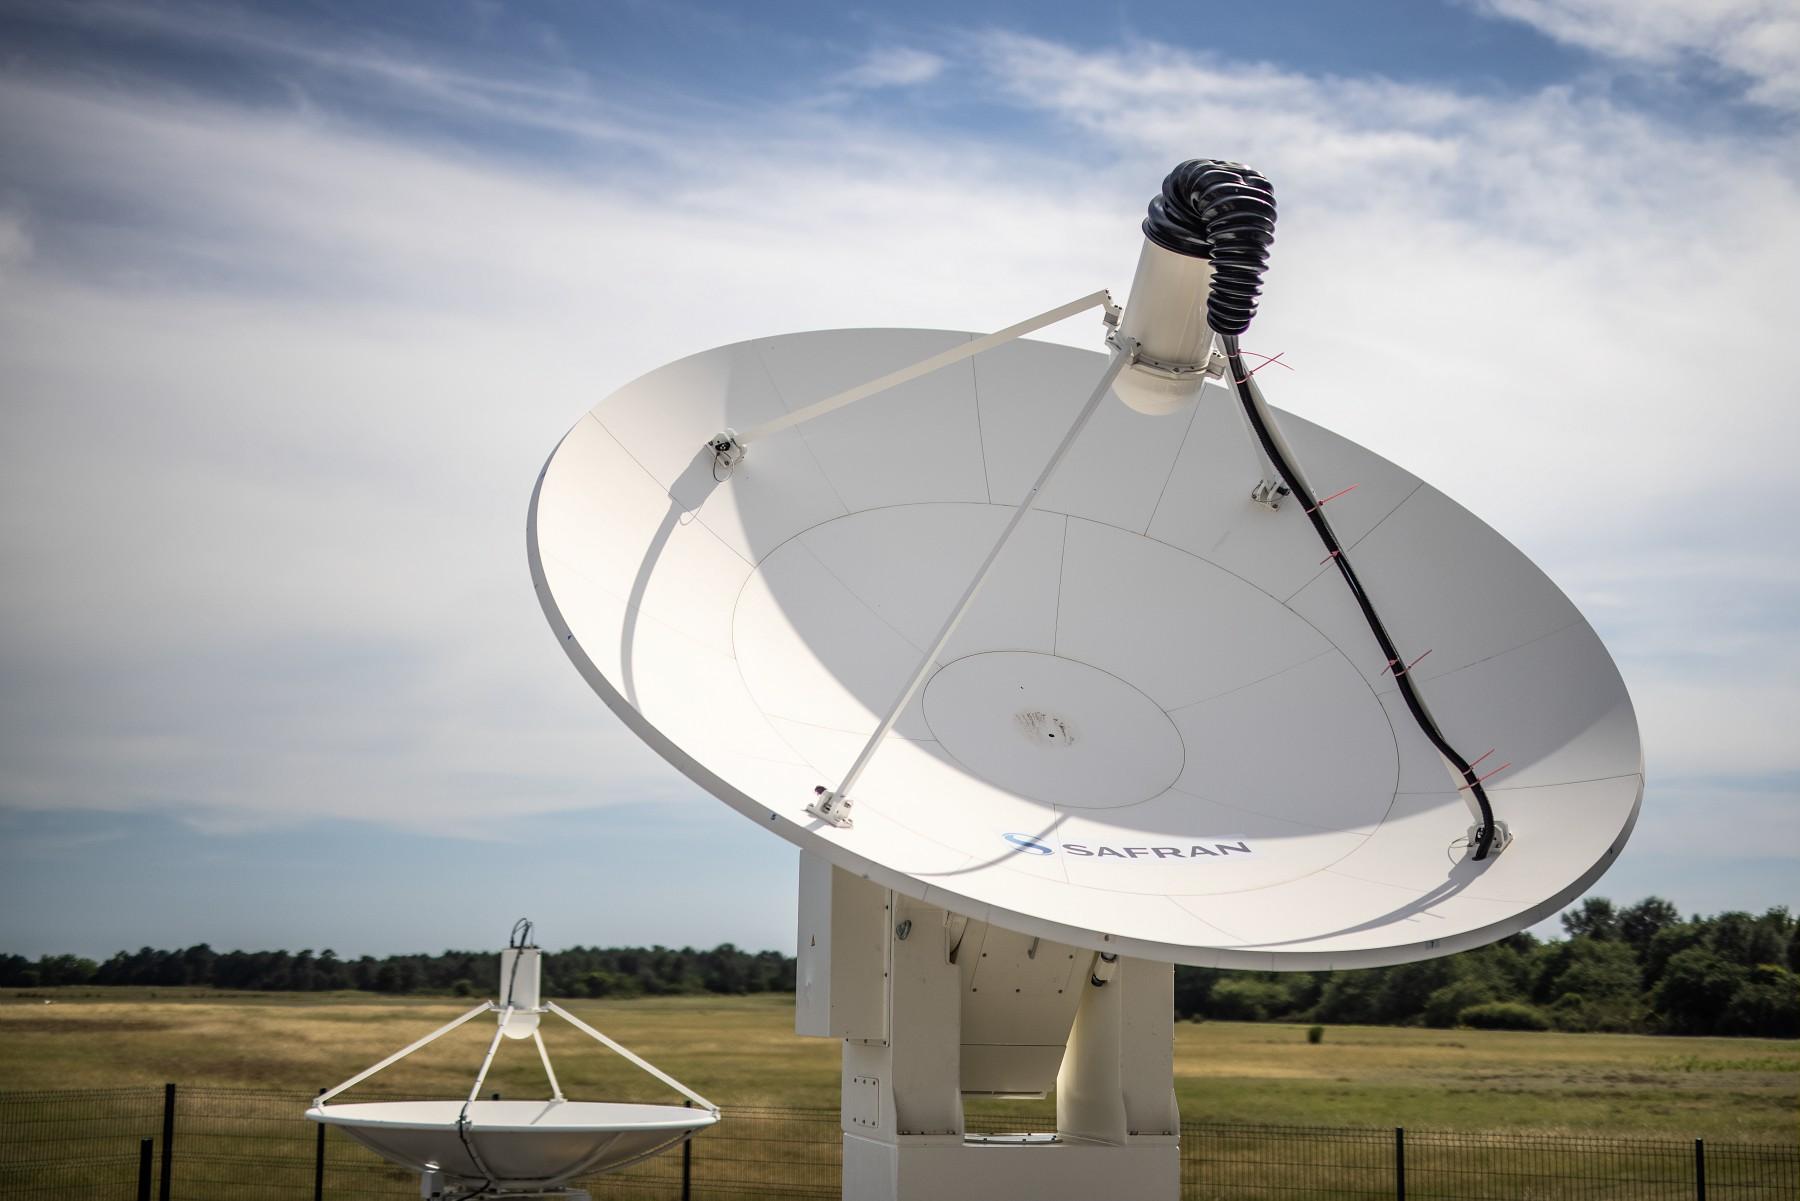 Safran Data Systems Supplies SPARTE 700 Tracking Telemetry Antenna to US Air Force